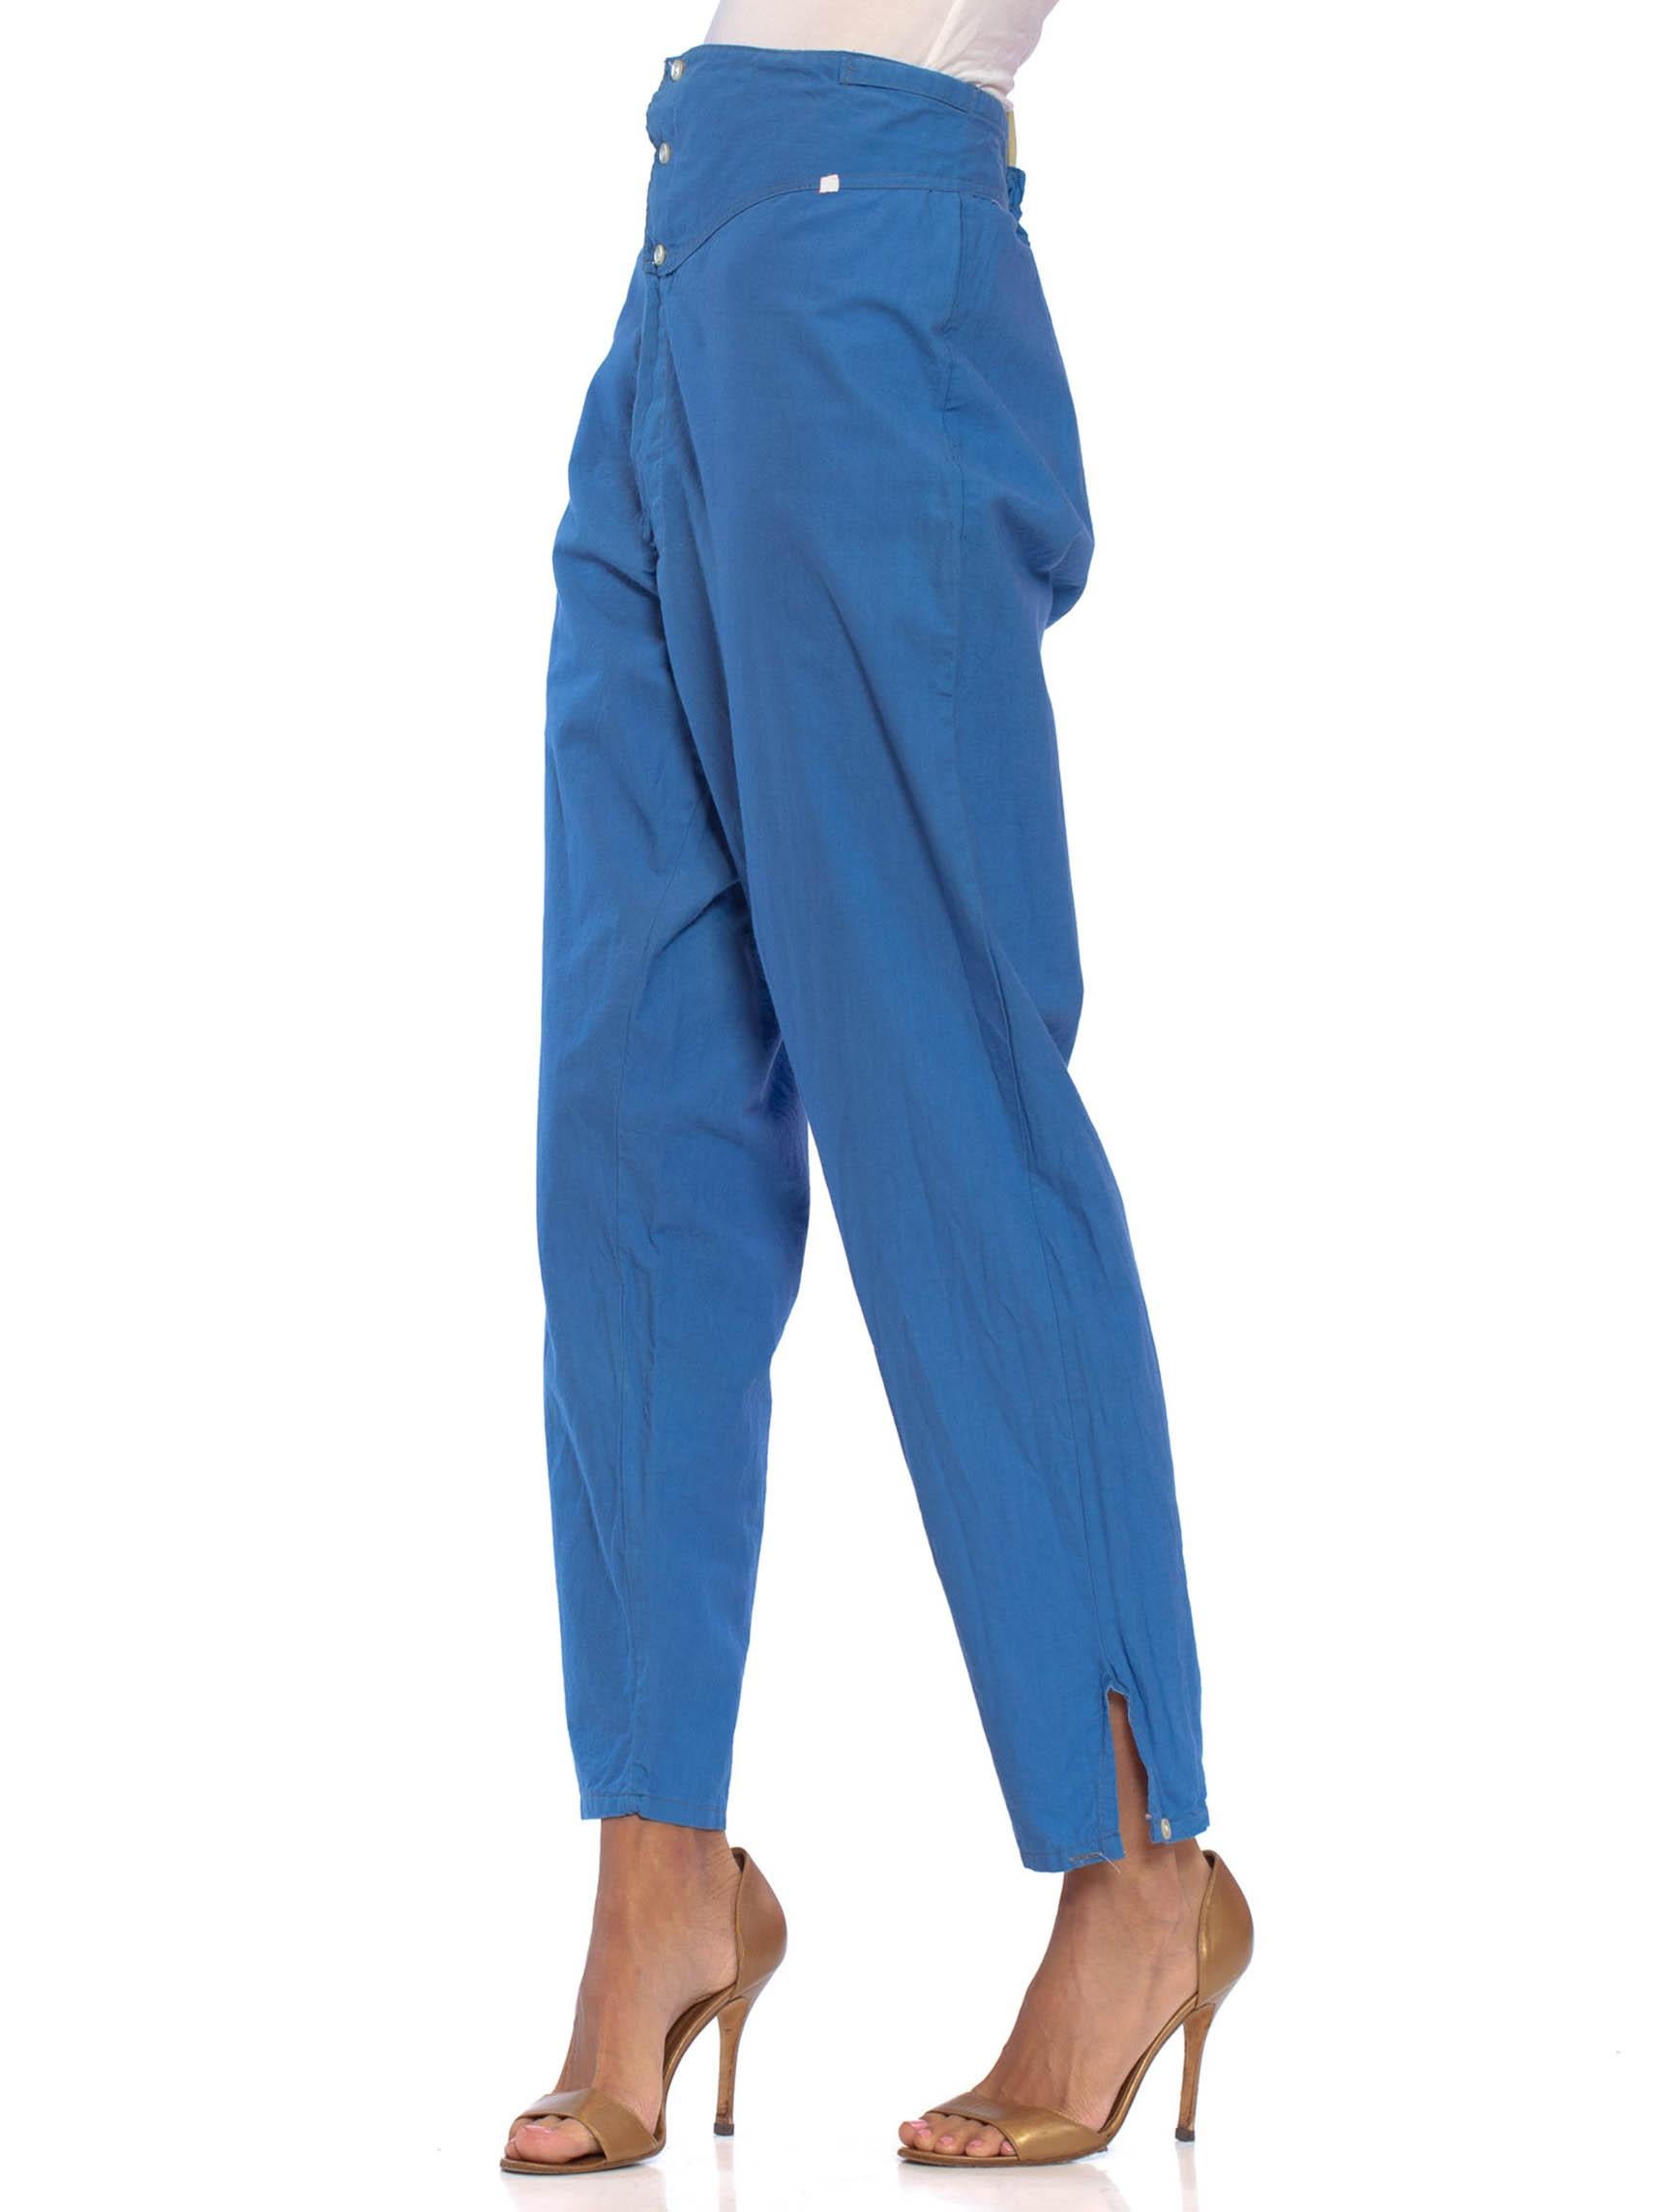 1960S French Blue Cotton Pajama Style Lounge Pants In Excellent Condition For Sale In New York, NY